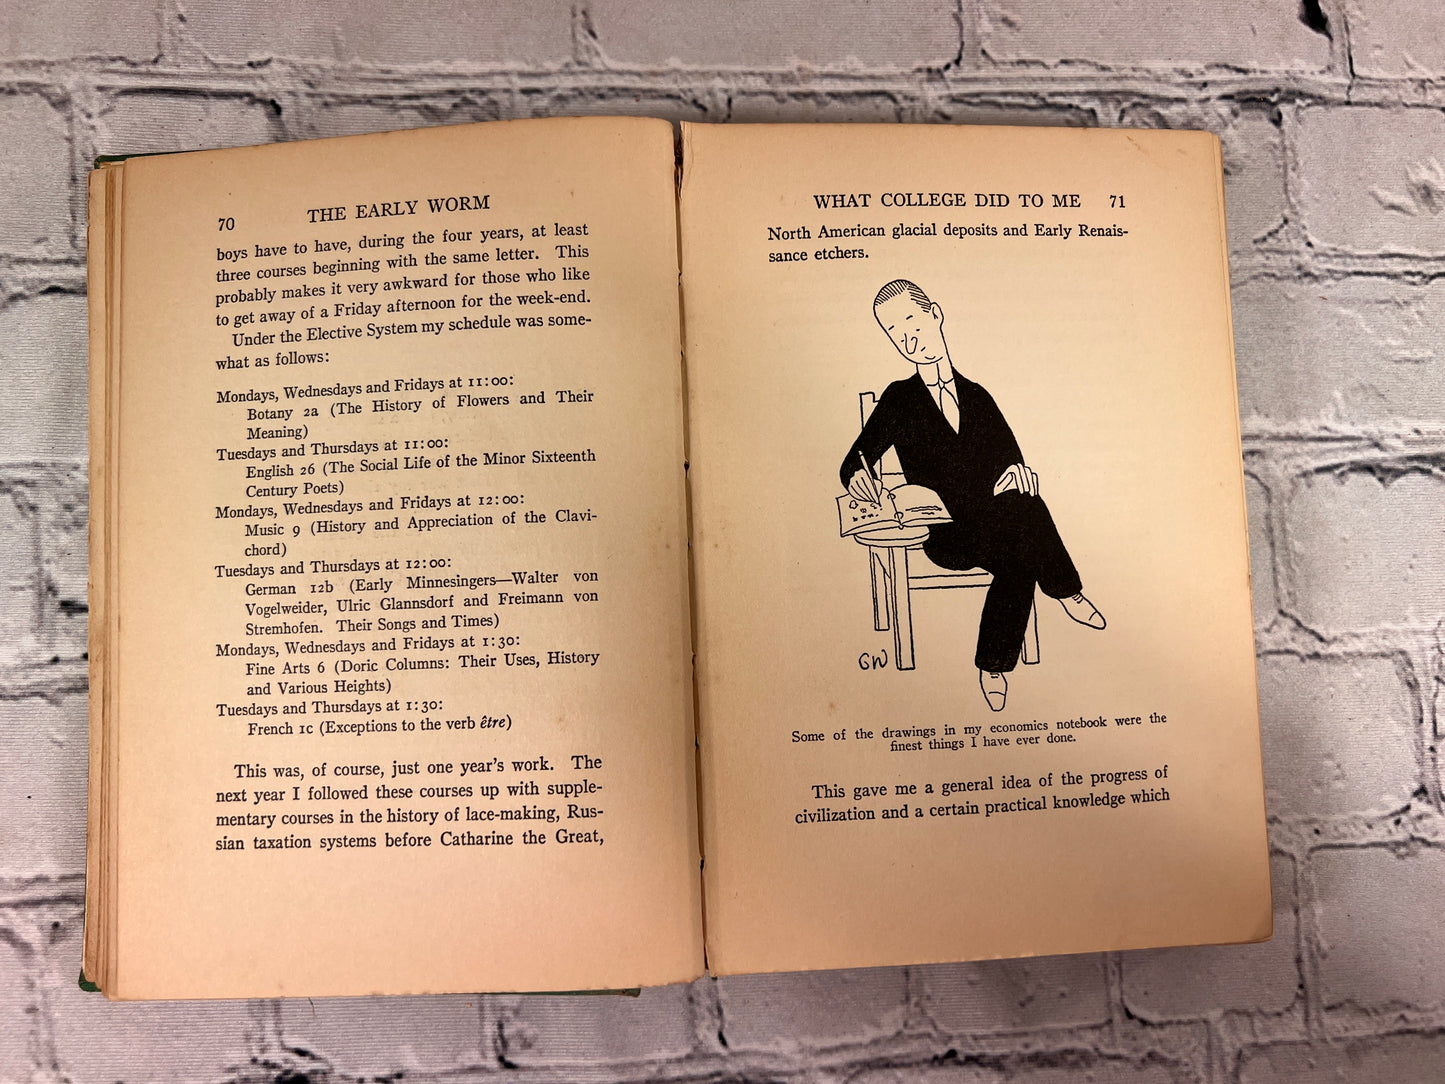 The Early Worm by Robert Benchley [1927 · 1st Edition]